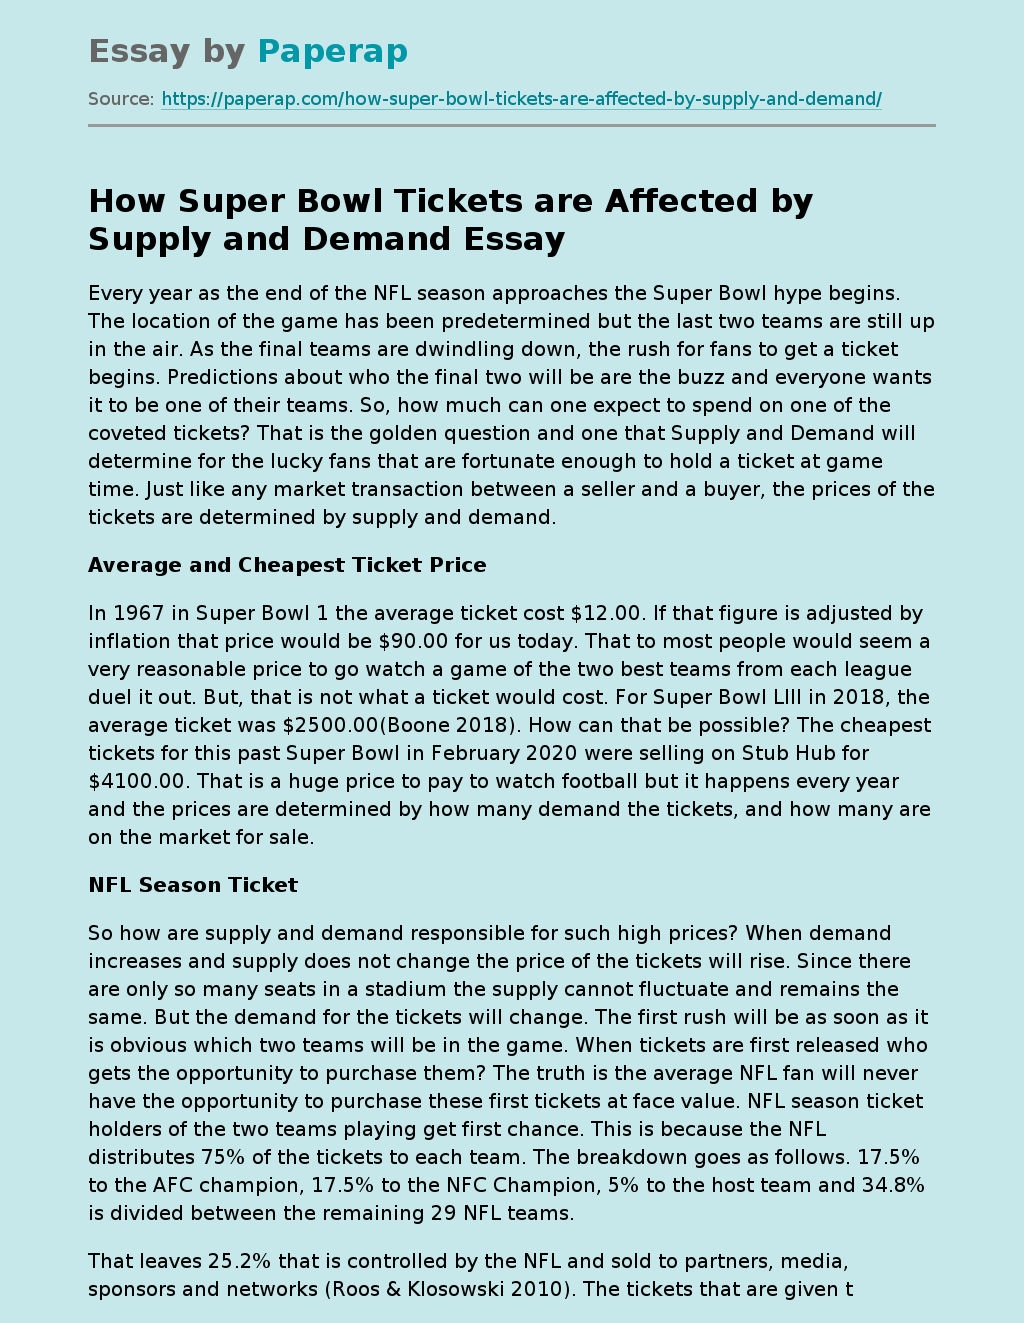 How Super Bowl Tickets are Affected by Supply and Demand